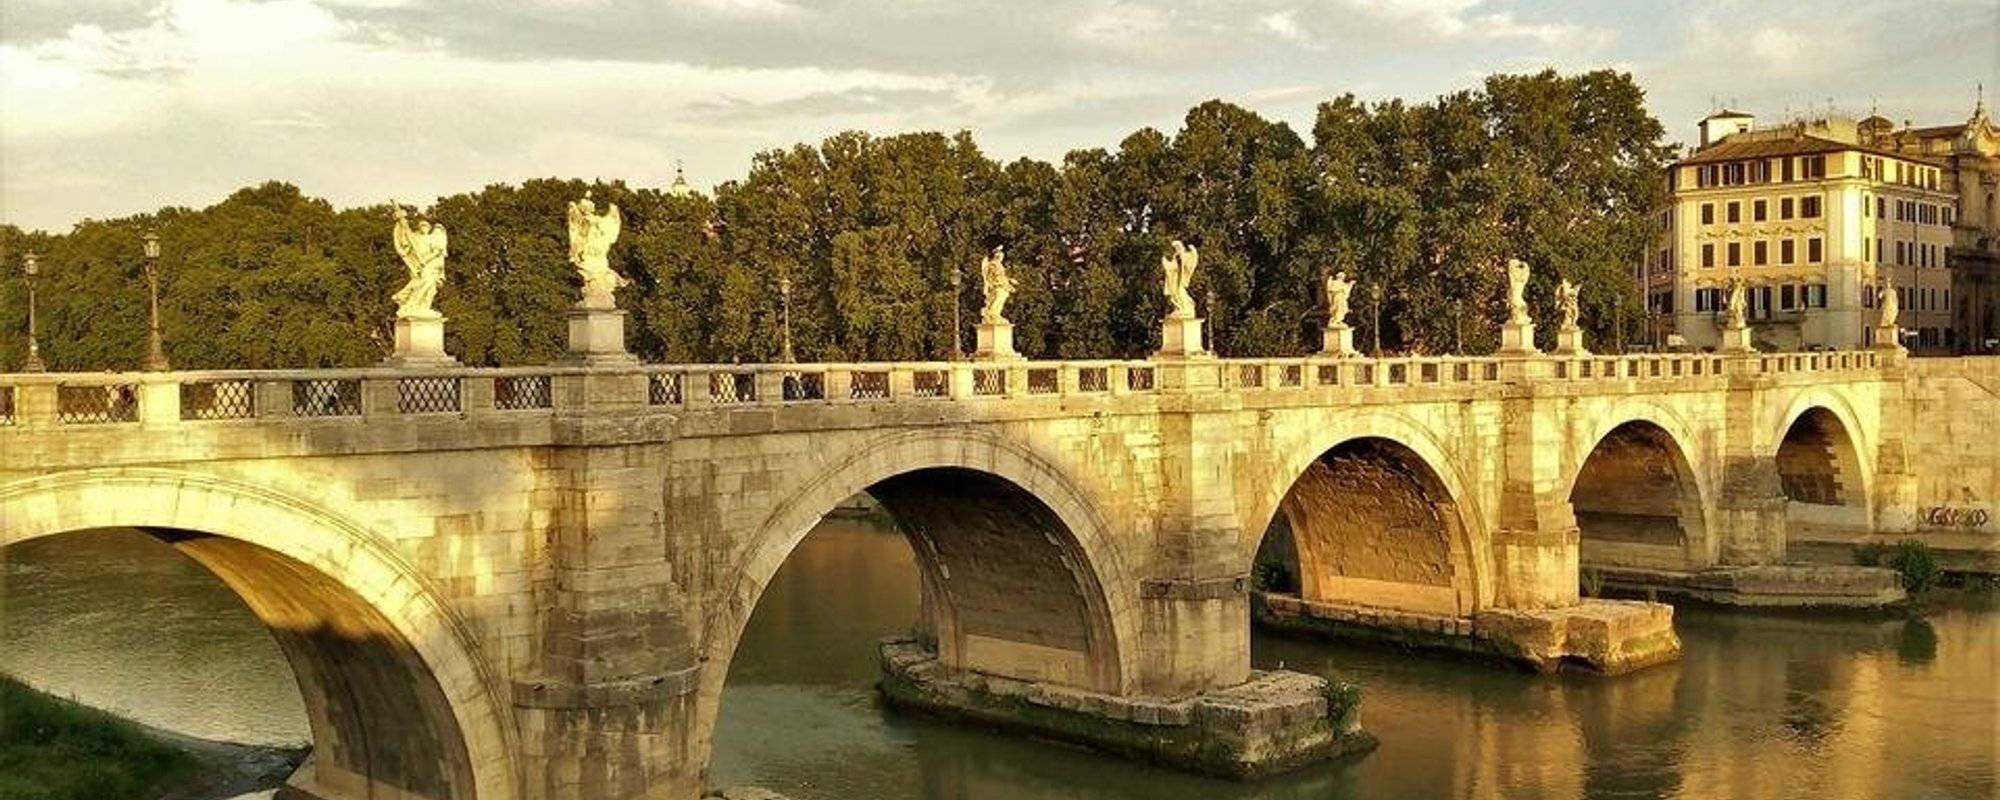 My photo collection of bridges from around the world